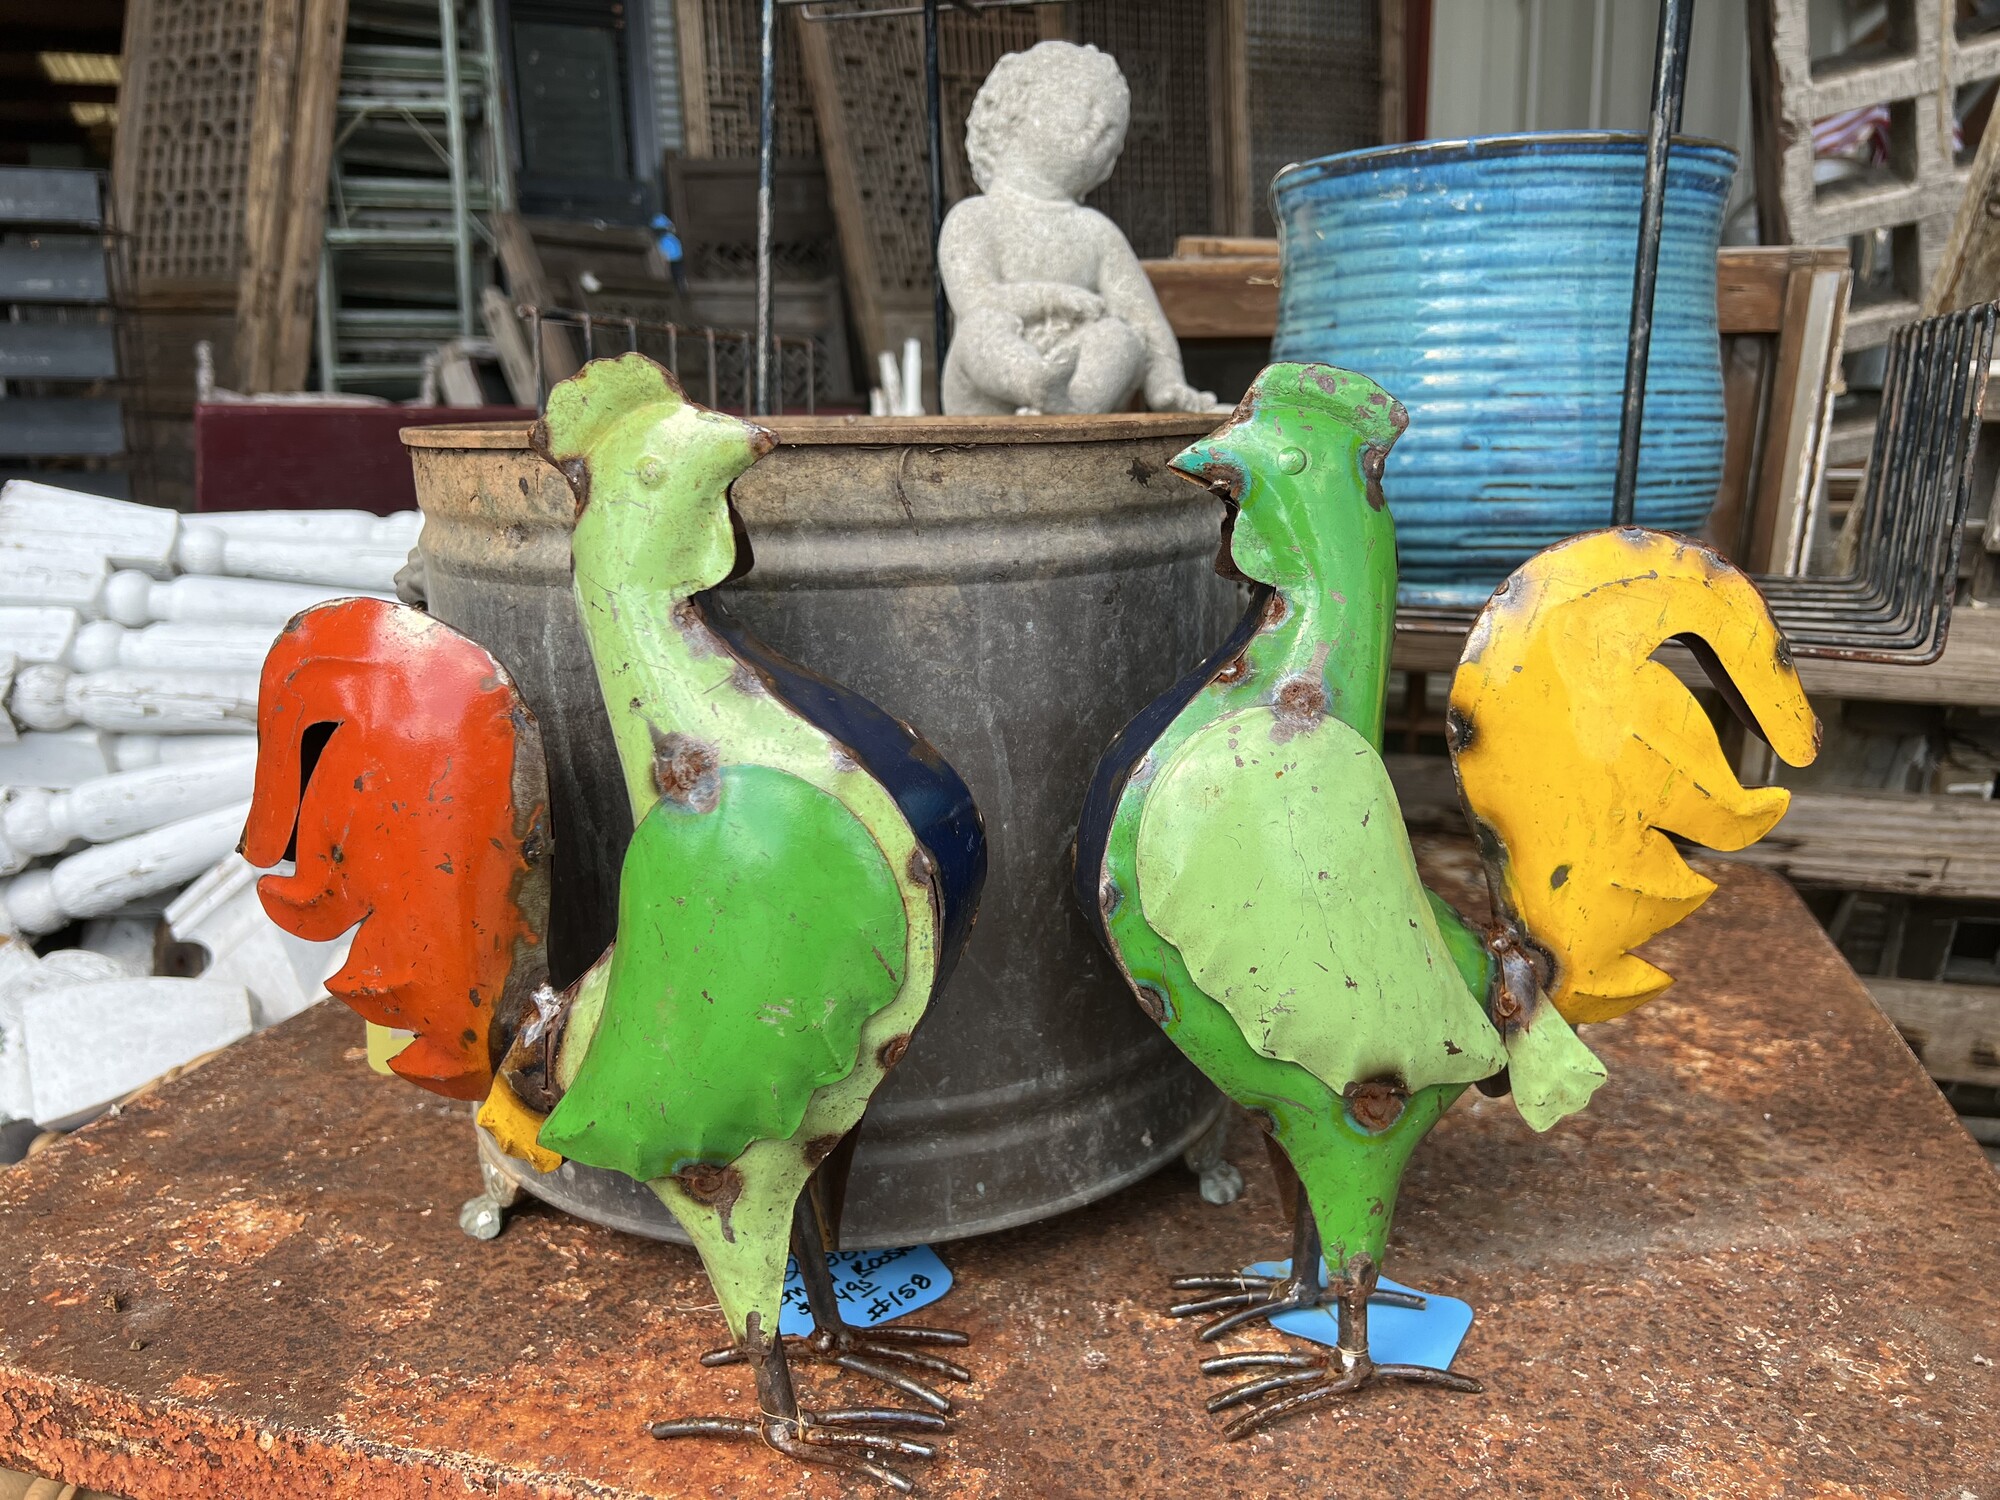 These fun and colorful roosters will add a touch of fun to any outdoor space
They are all metal and measure 12 inches high and 9 inches wide
Colors vary